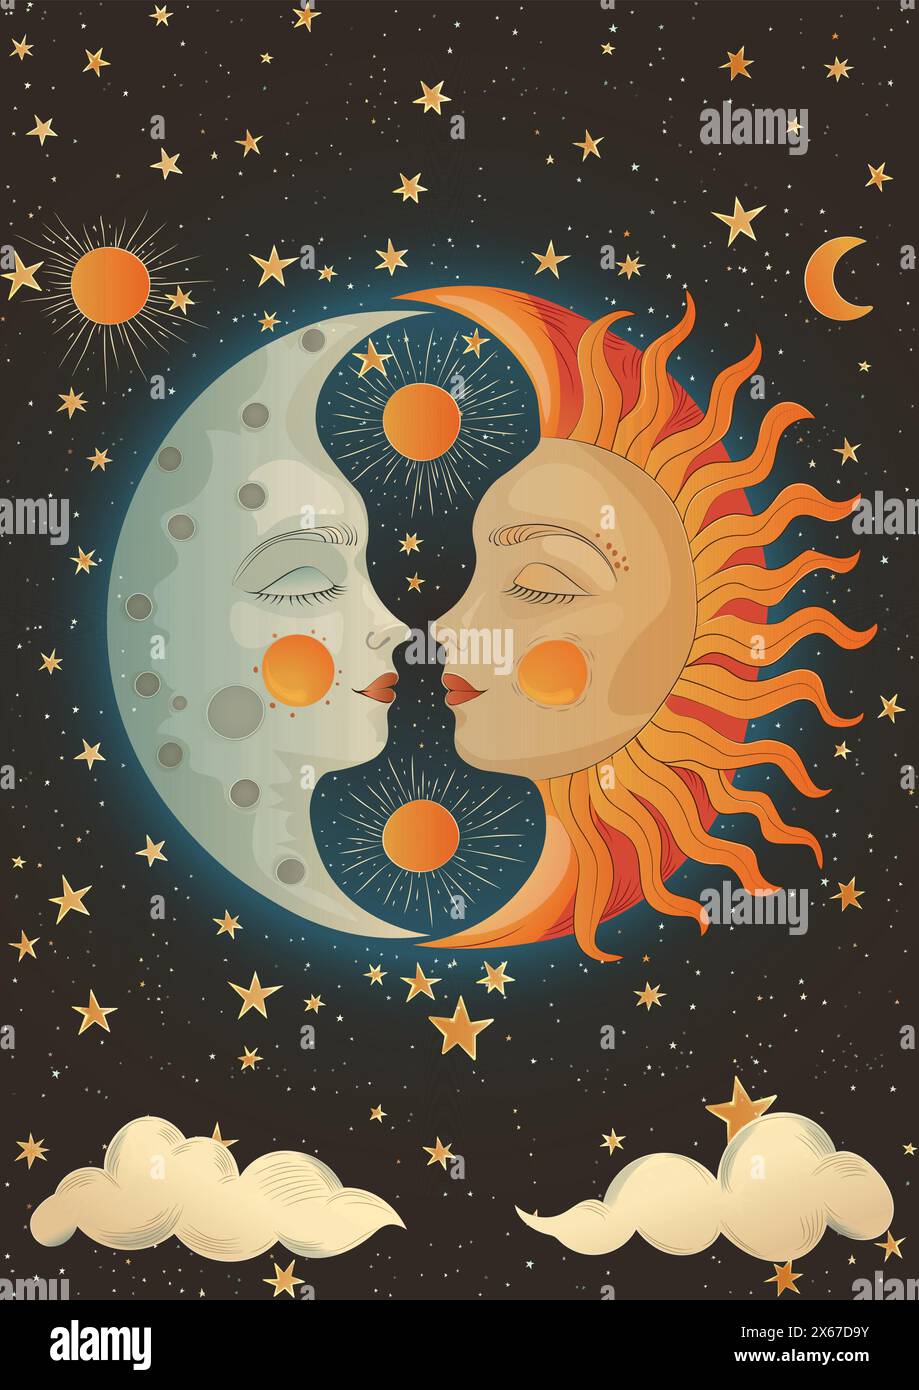 Colorful vector artwork of folklore sun and moon in profile, styled after ancient Slavic drawings. They smile with closed eyes against a dark background Stock Vector